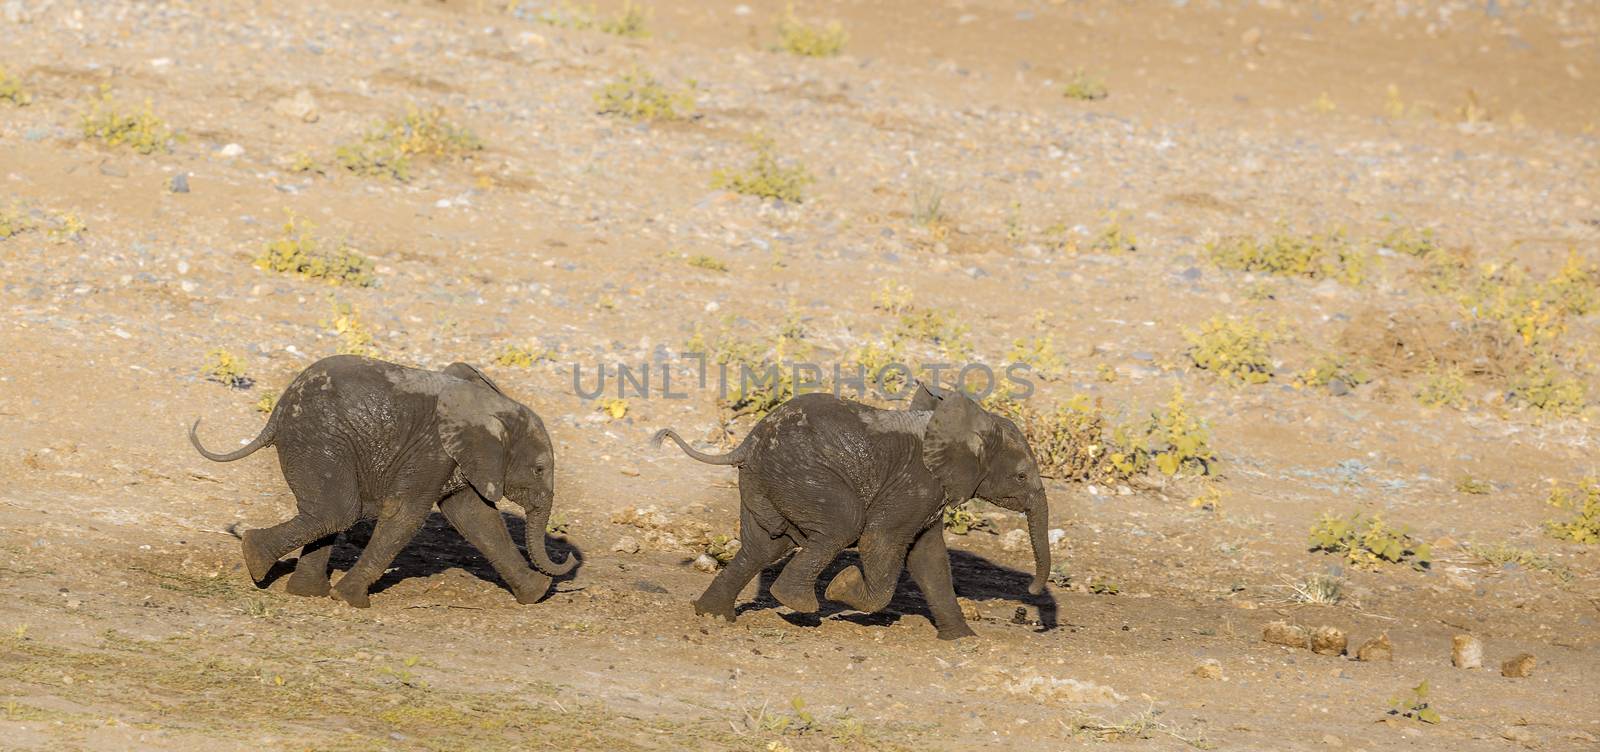 Two African bush elephants calf running in sand in Kruger National park, South Africa ; Specie Loxodonta africana family of Elephantidae